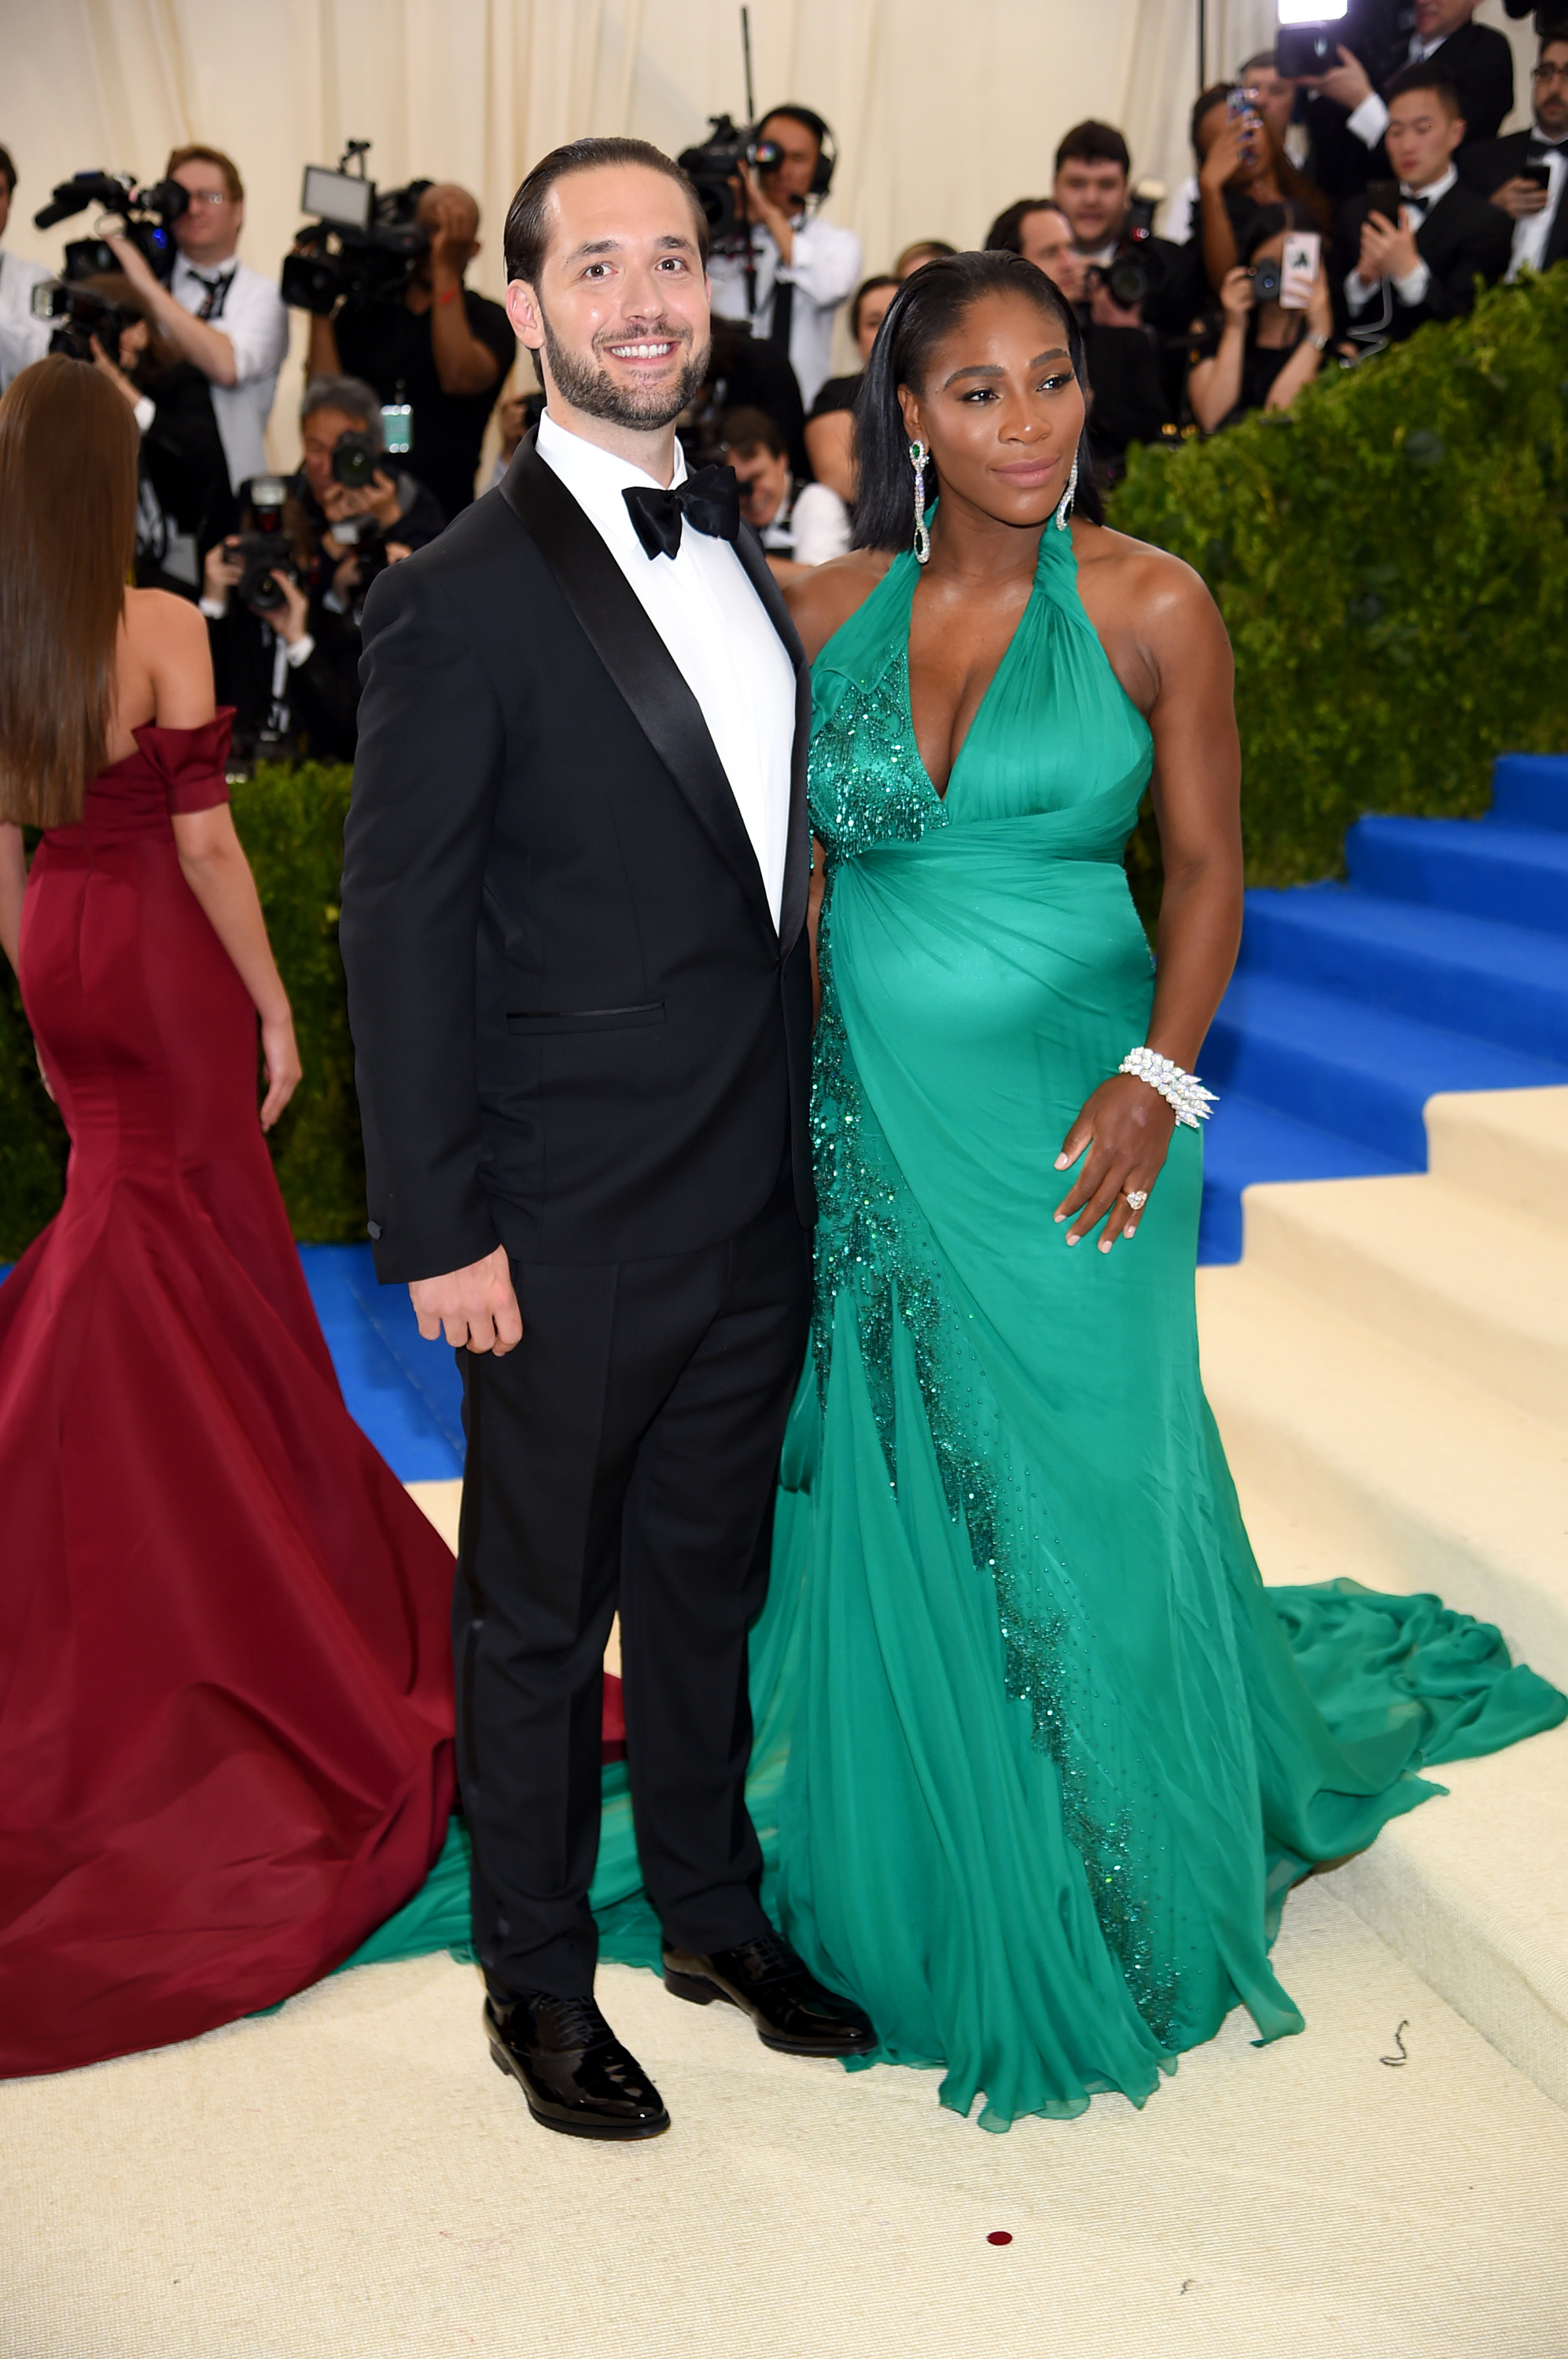 NEW YORK, NY - MAY 01:  Alexis Ohanian (L) and Serena Williams attend the "Rei Kawakubo/Comme des Garcons: Art Of The In-Between" Costume Institute Gala at Metropolitan Museum of Art on May 1, 2017 in New York City.  (Photo by Dimitrios Kambouris/Getty Images)